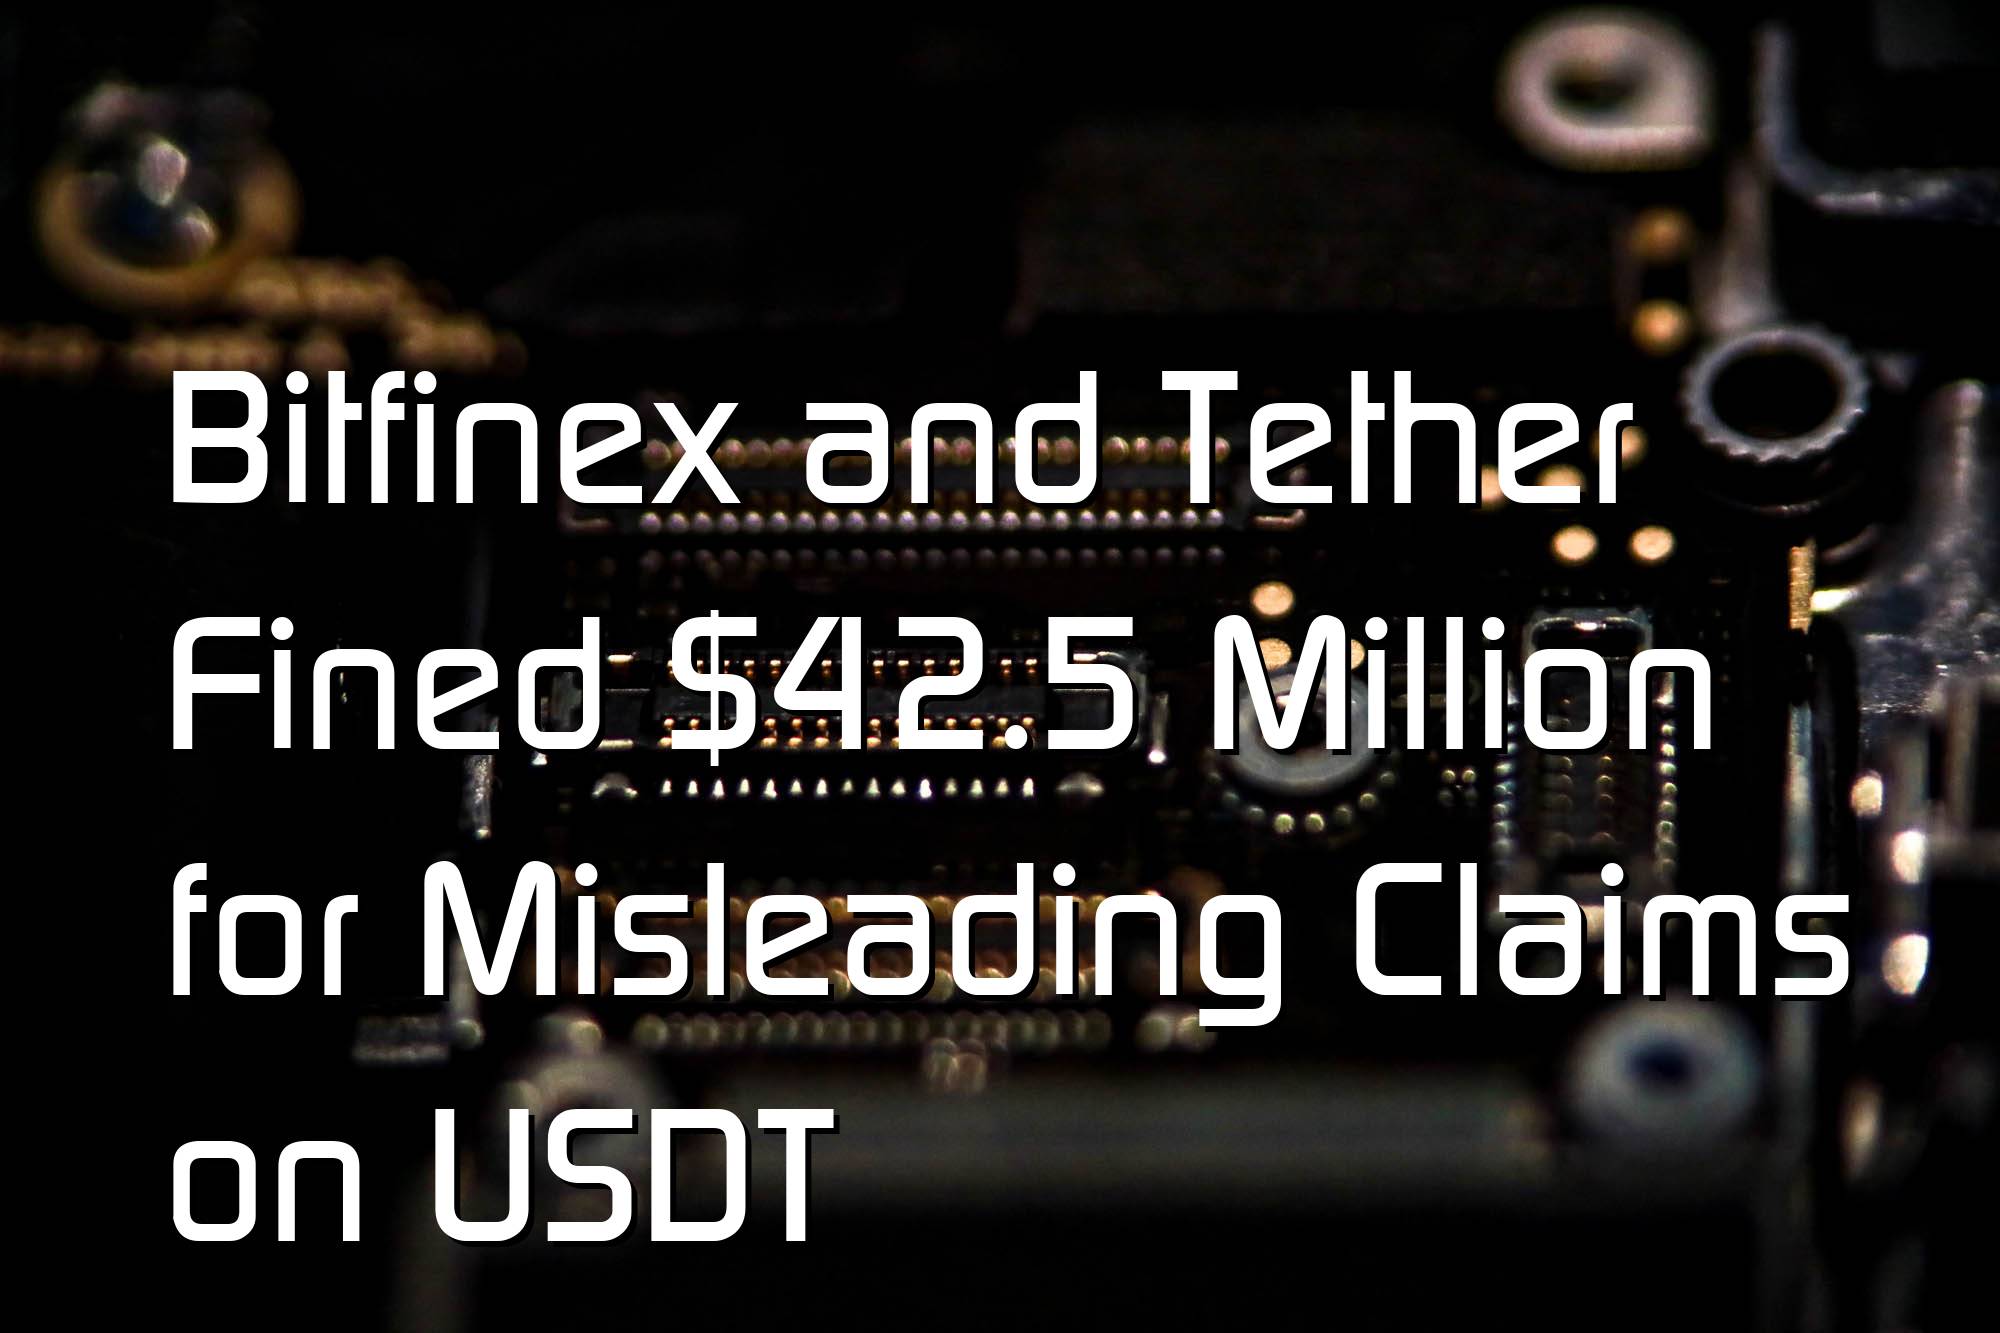 Bitfinex and Tether Fined $42.5 Million for Misleading Claims on USDT